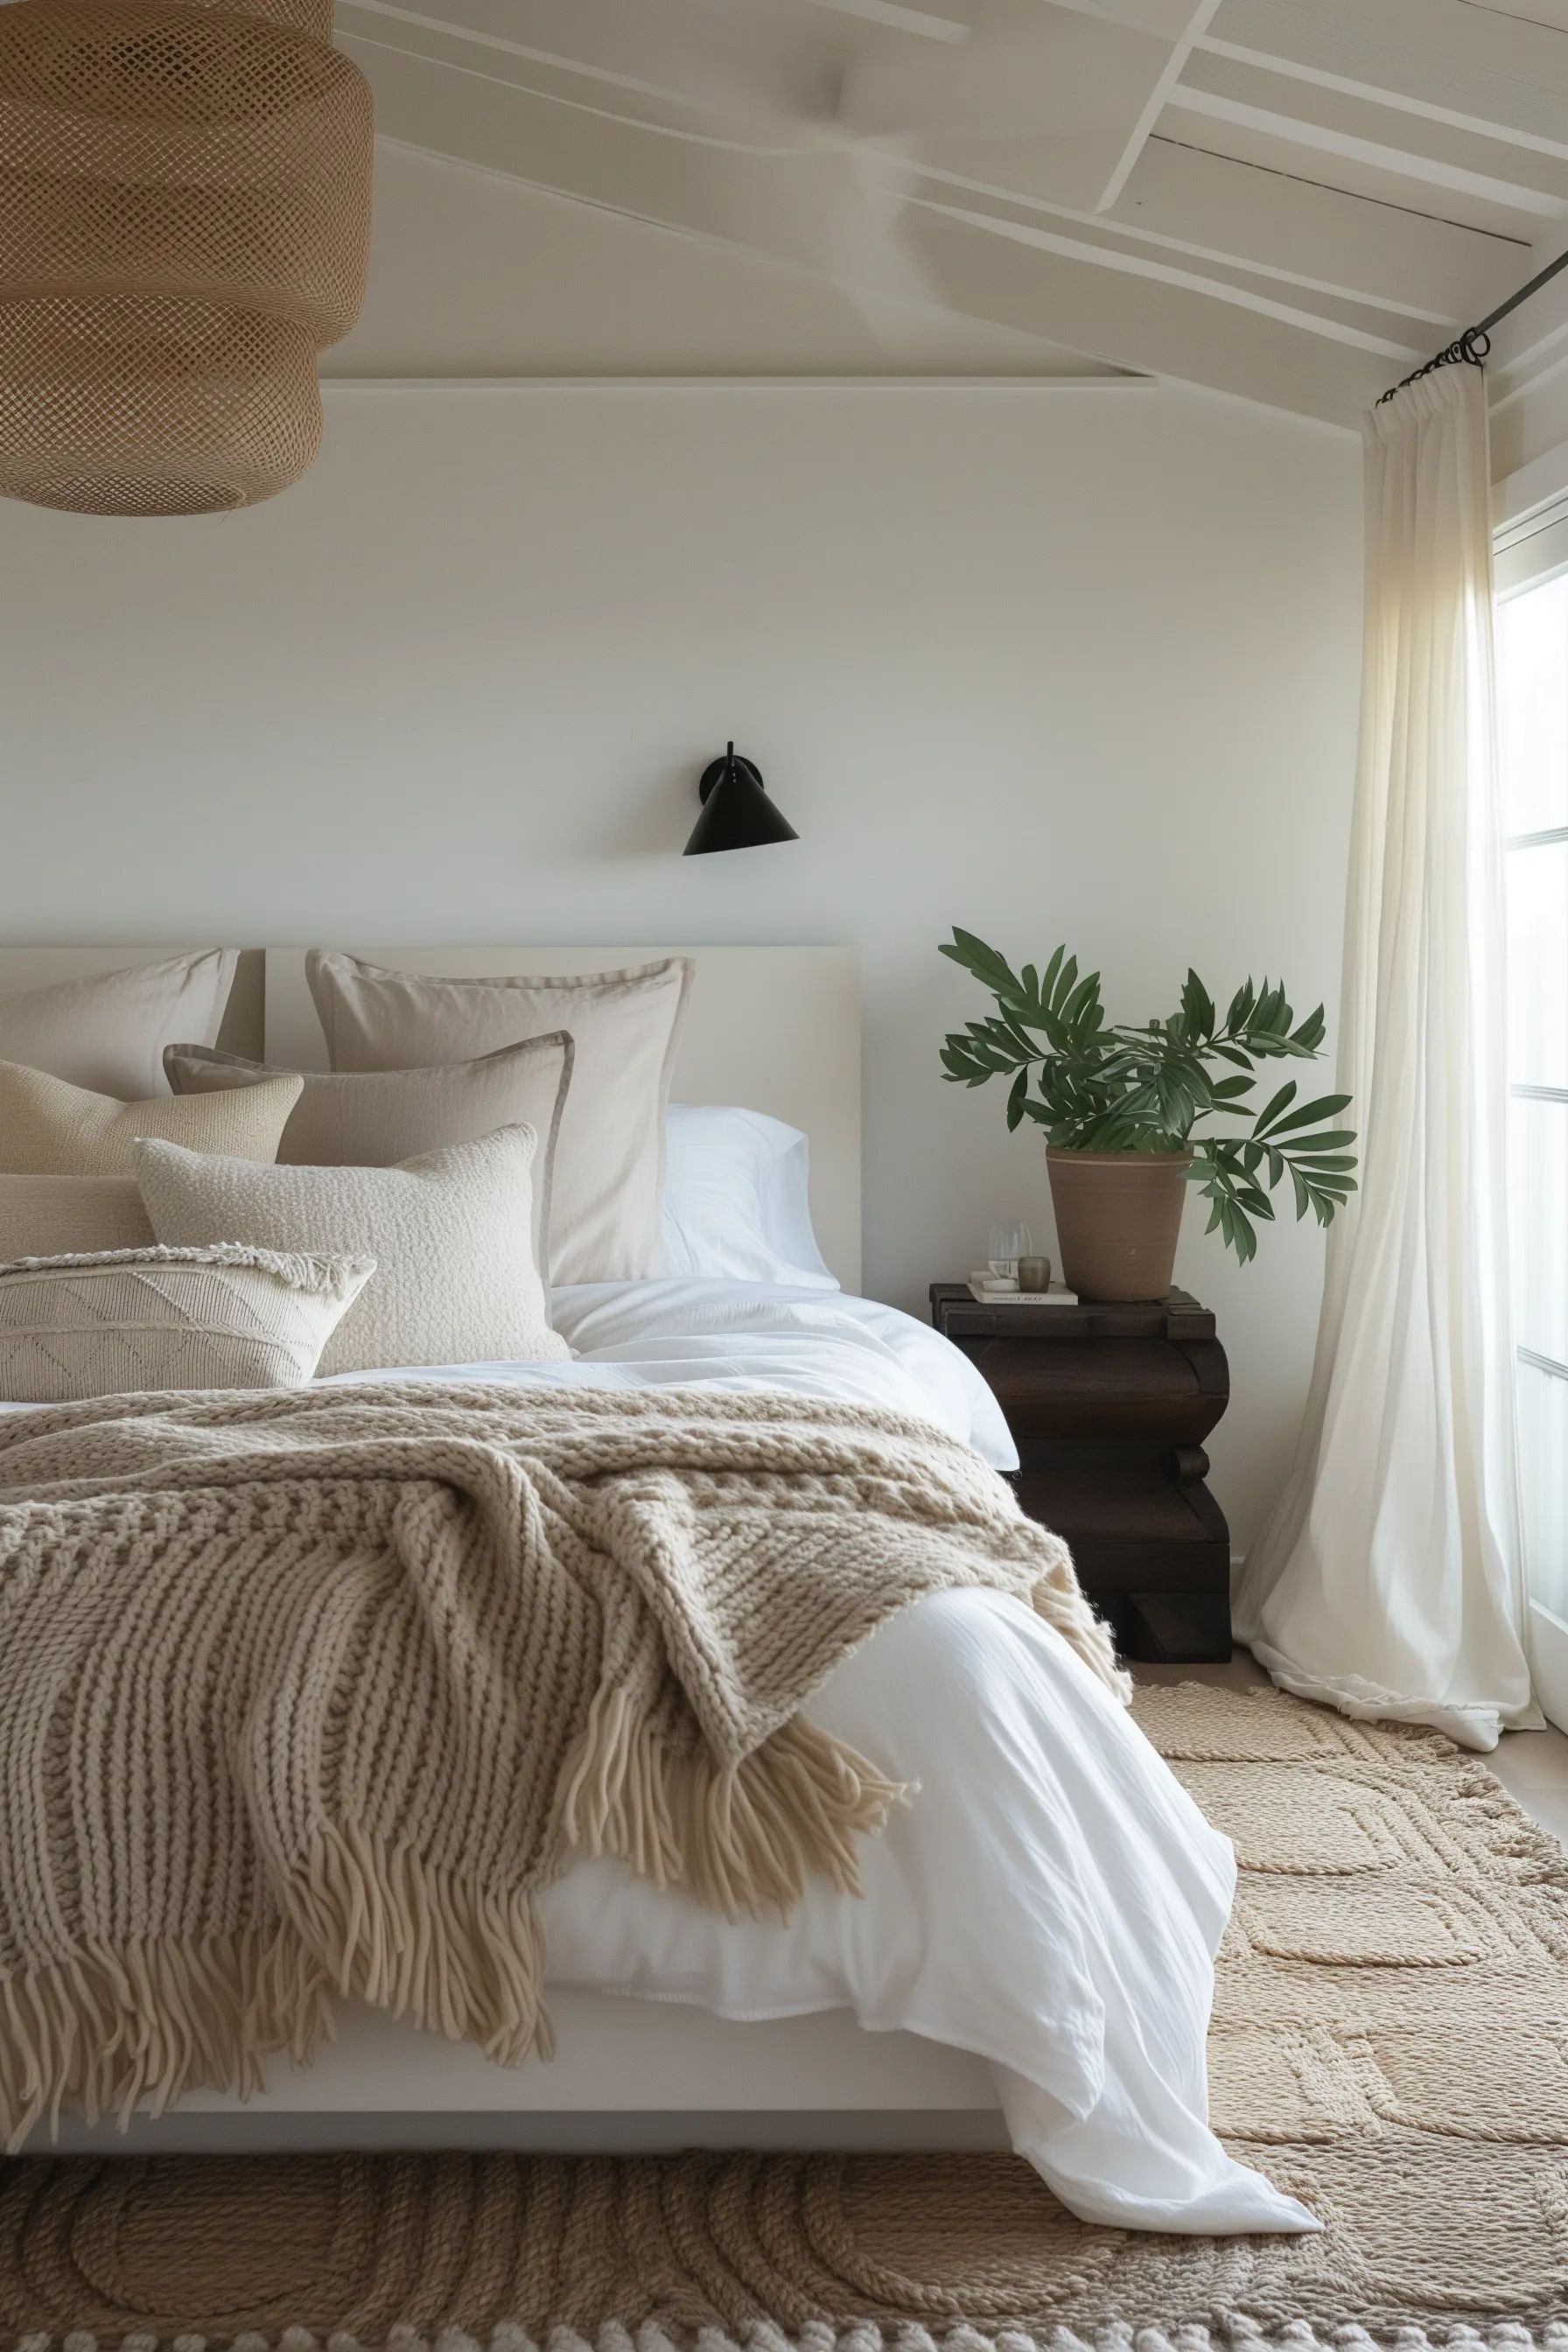 white bed linen on bed with plants